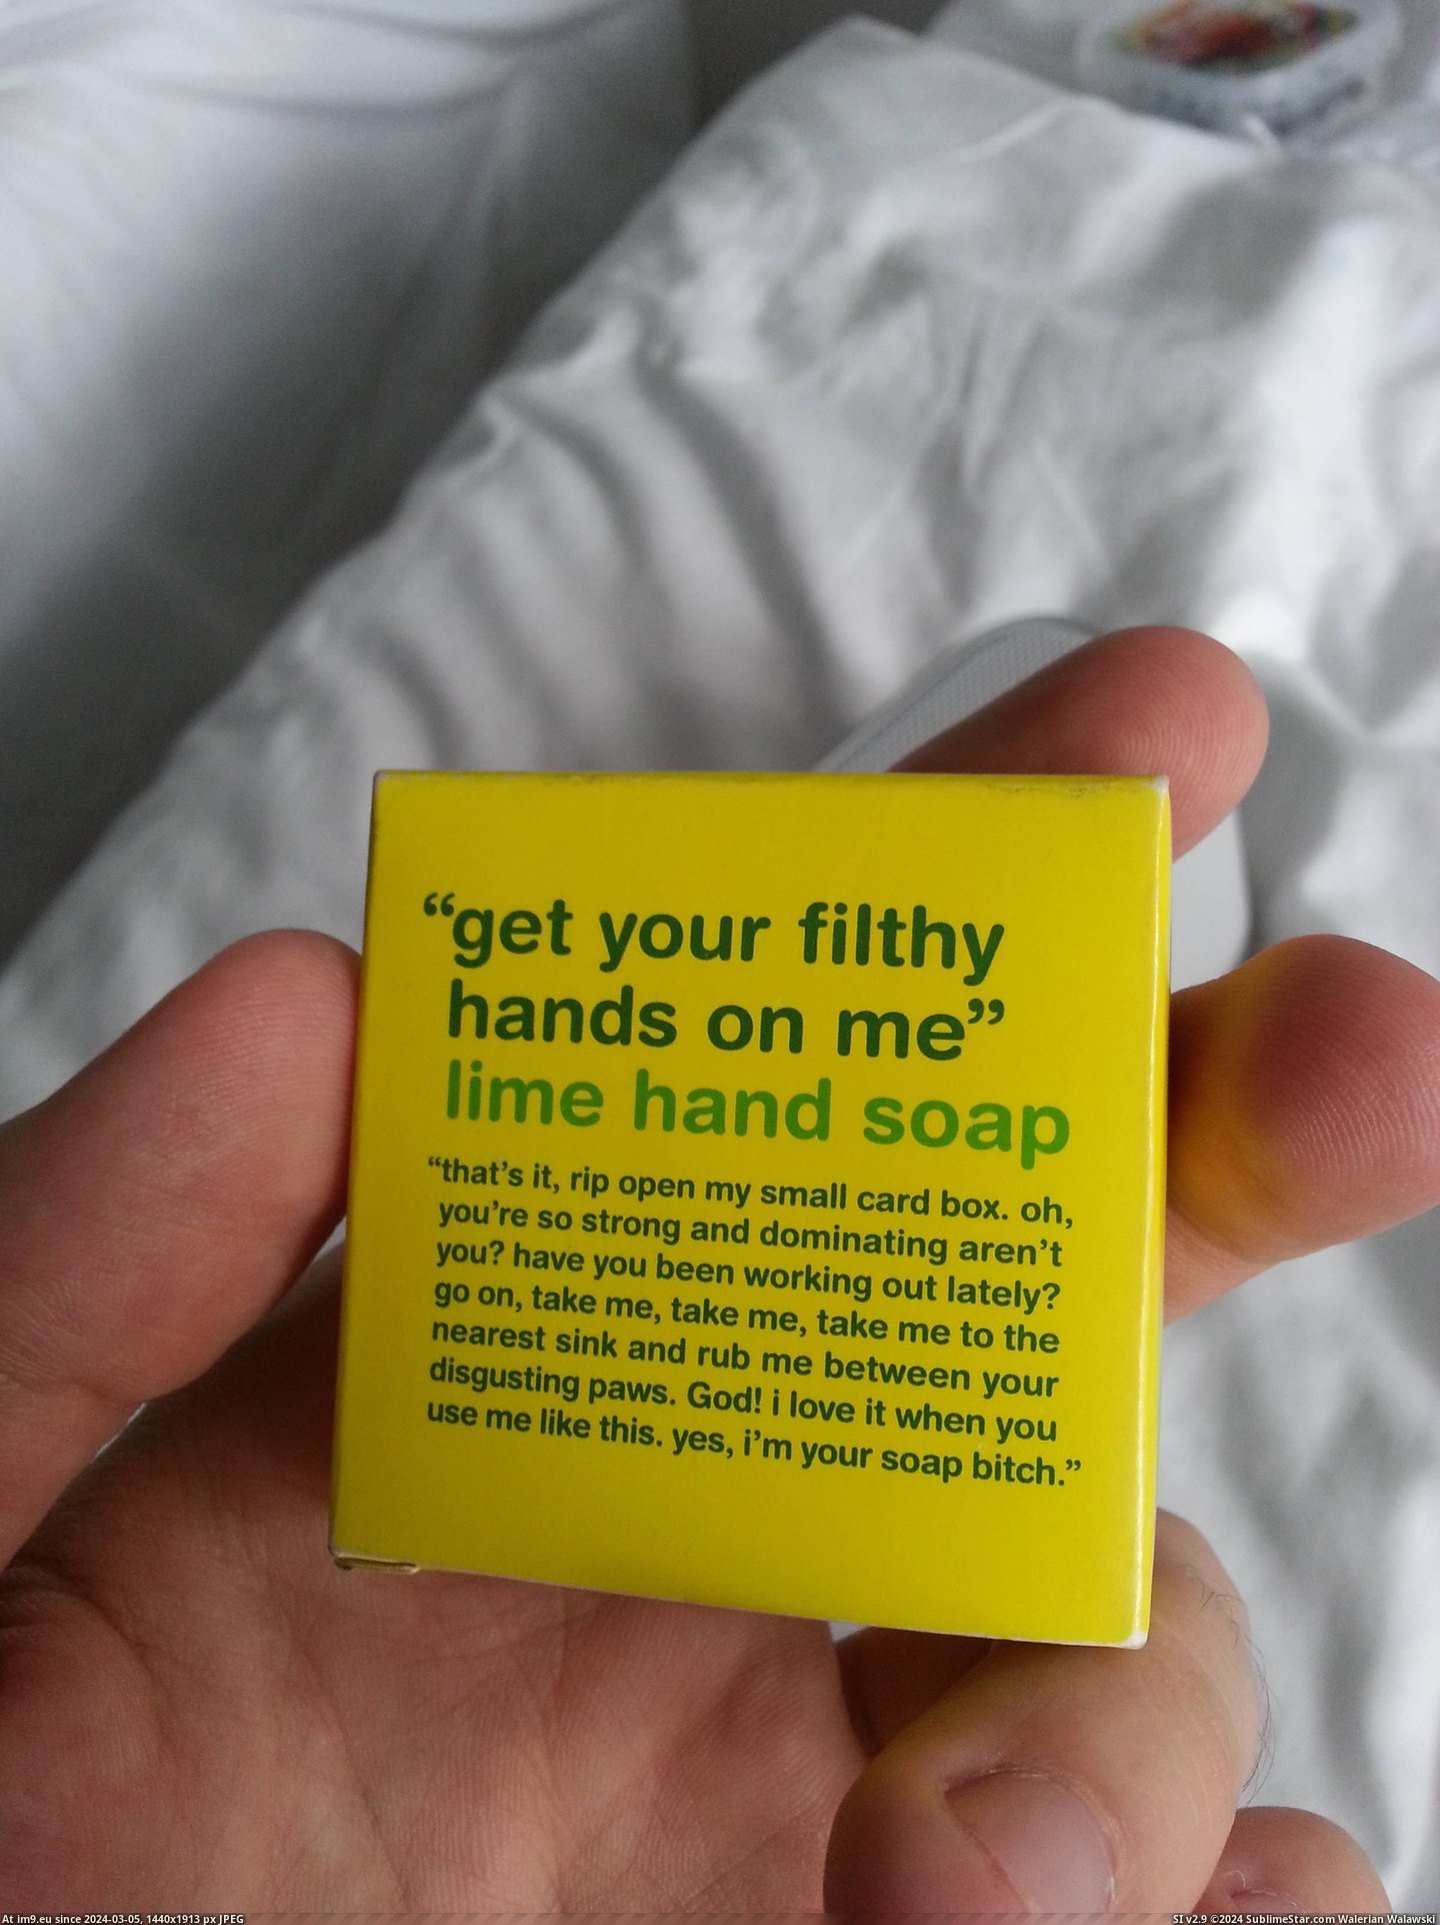 #Funny #Soap #Amsterdam #Horny [Funny] Even the soap is horny in Amsterdam Pic. (Obraz z album My r/FUNNY favs))